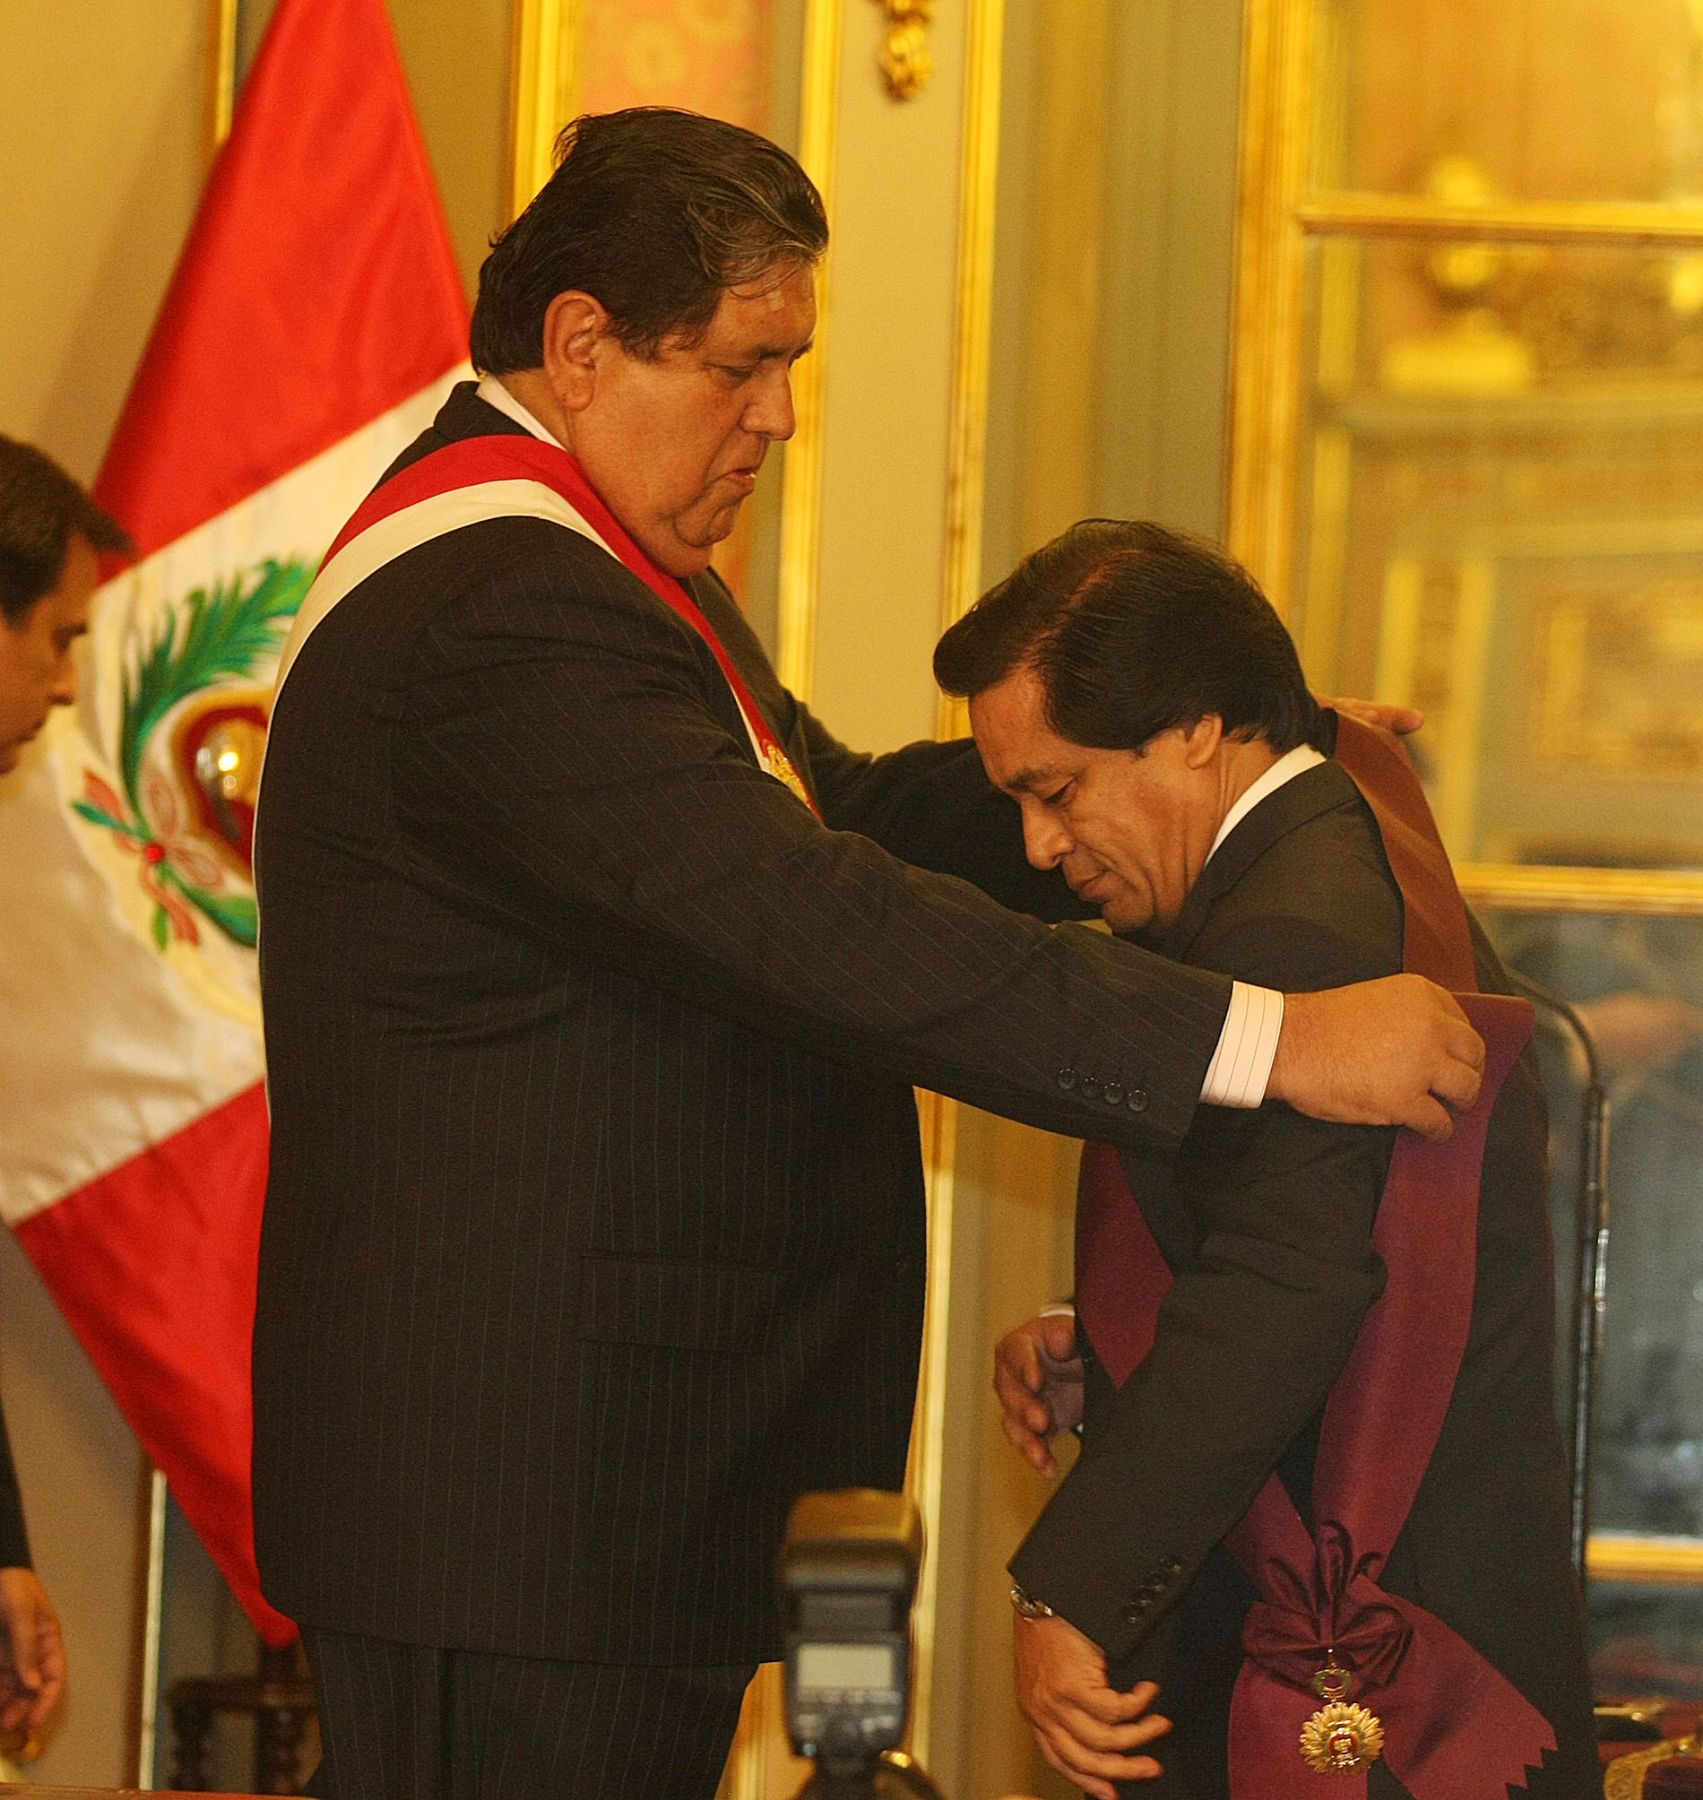 Jose Antonio Chang receives Peru’s highest accolade, the Order of the Sun, from the hands of President Alan Garcia. Photo: ANDINA/Vidal Tarqui